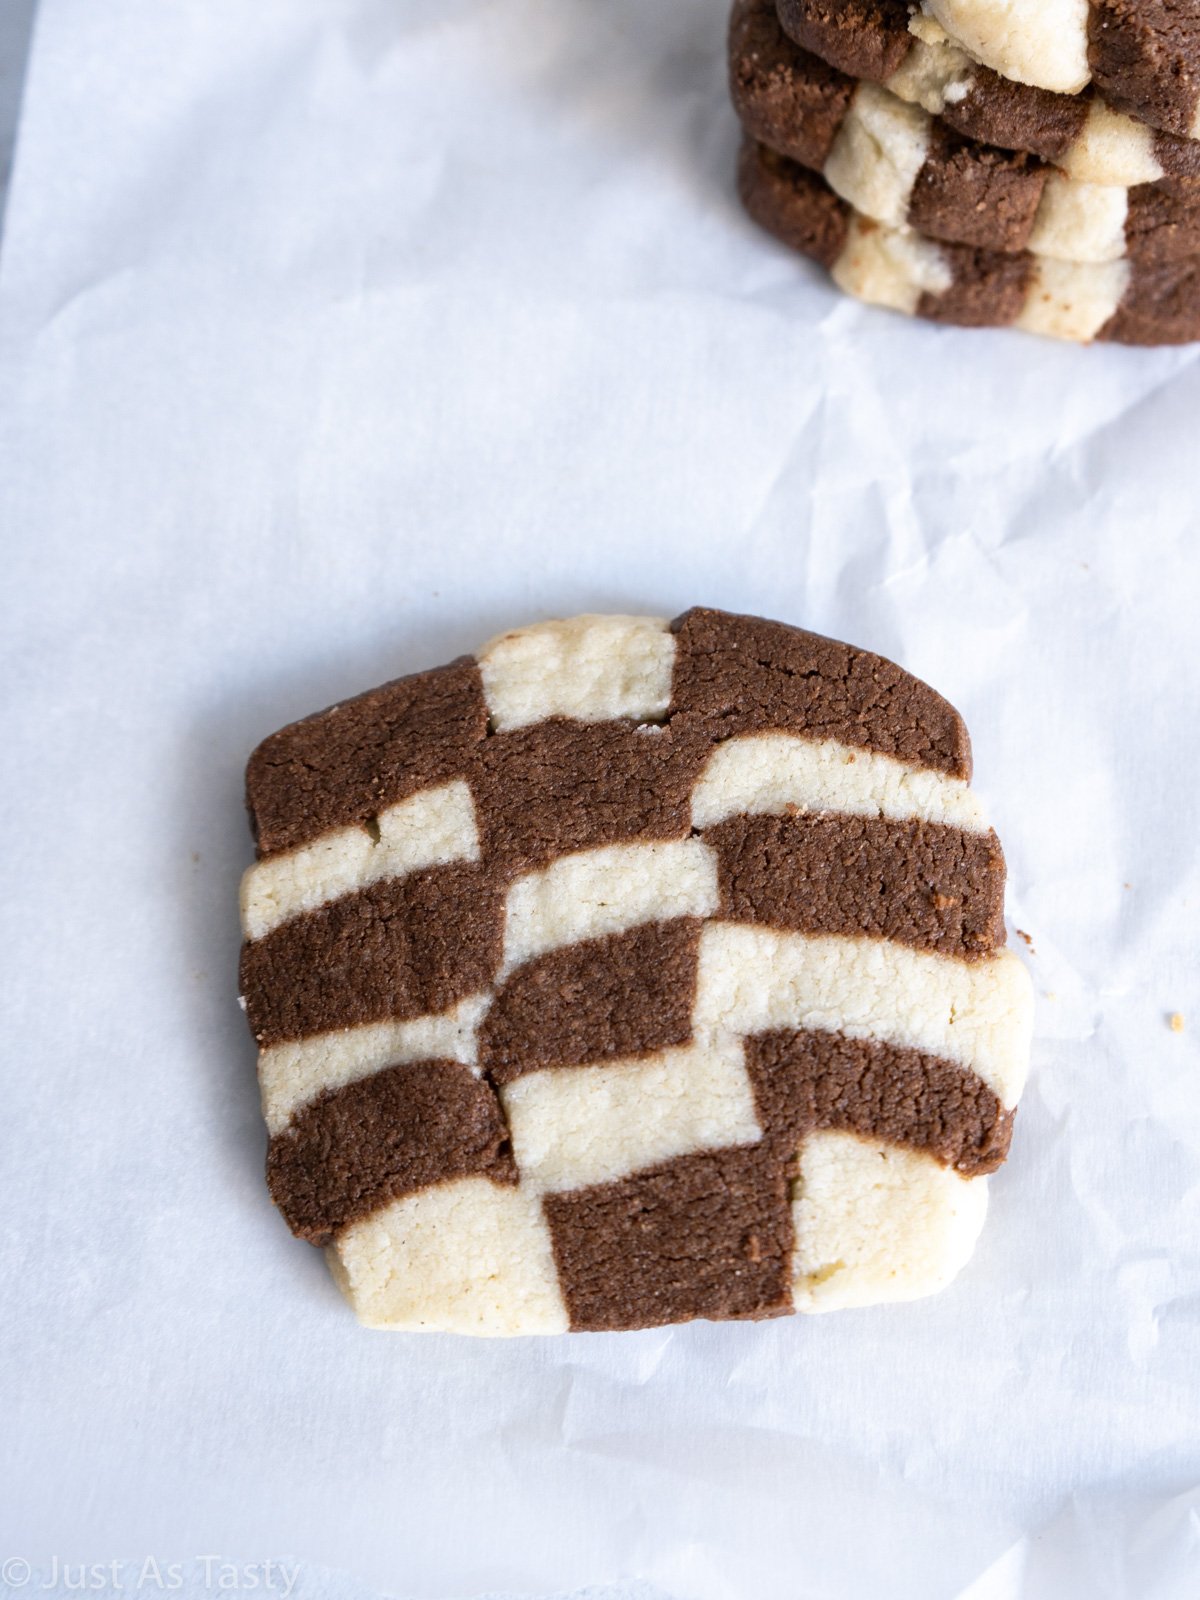 Close-up of a chocolate and vanilla checkered cookie.